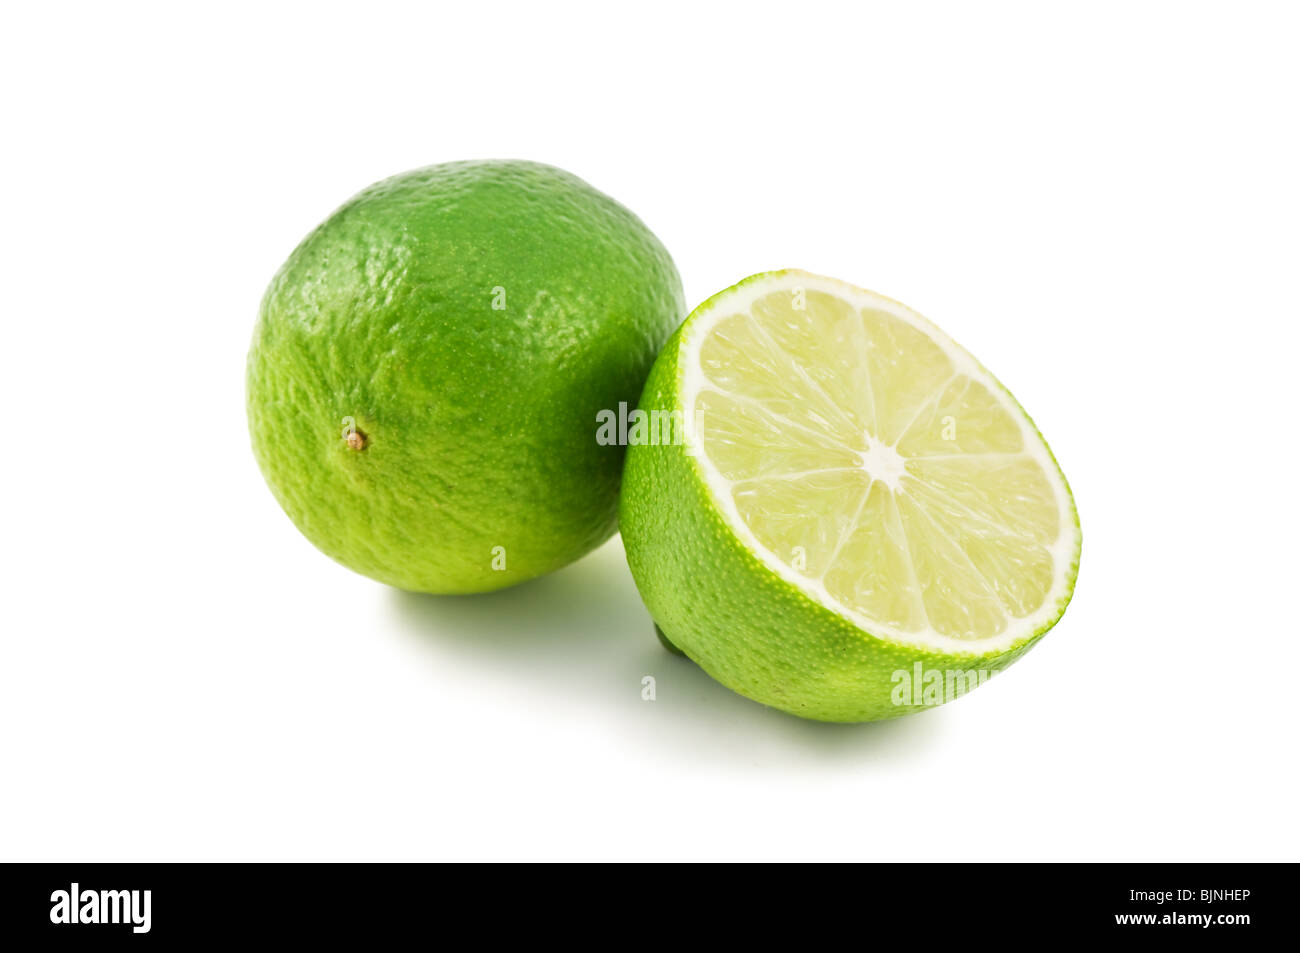 green lime isolated on white Stock Photo